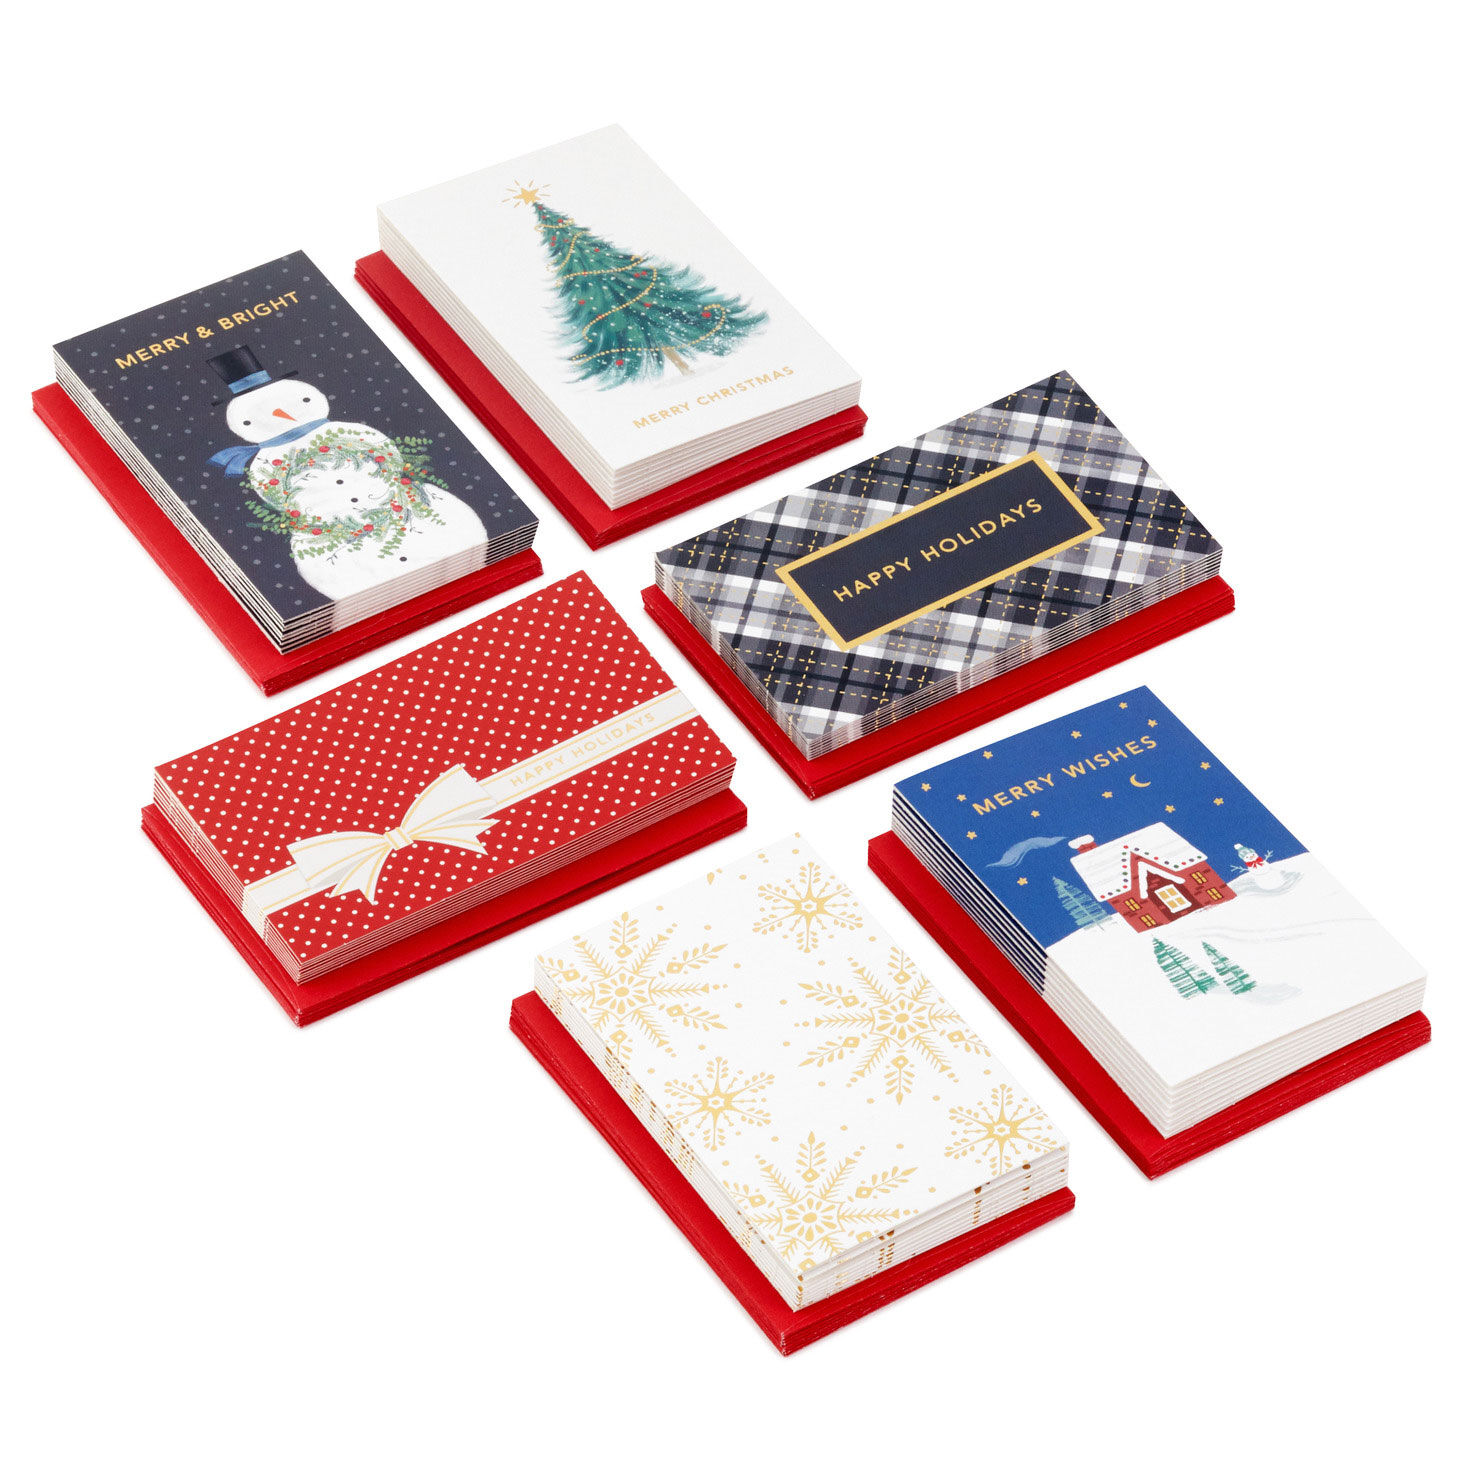 Upscale Merriment Boxed Christmas Mini Blank Cards Assortment, Pack of 48 for only USD 19.99 | Hallmark